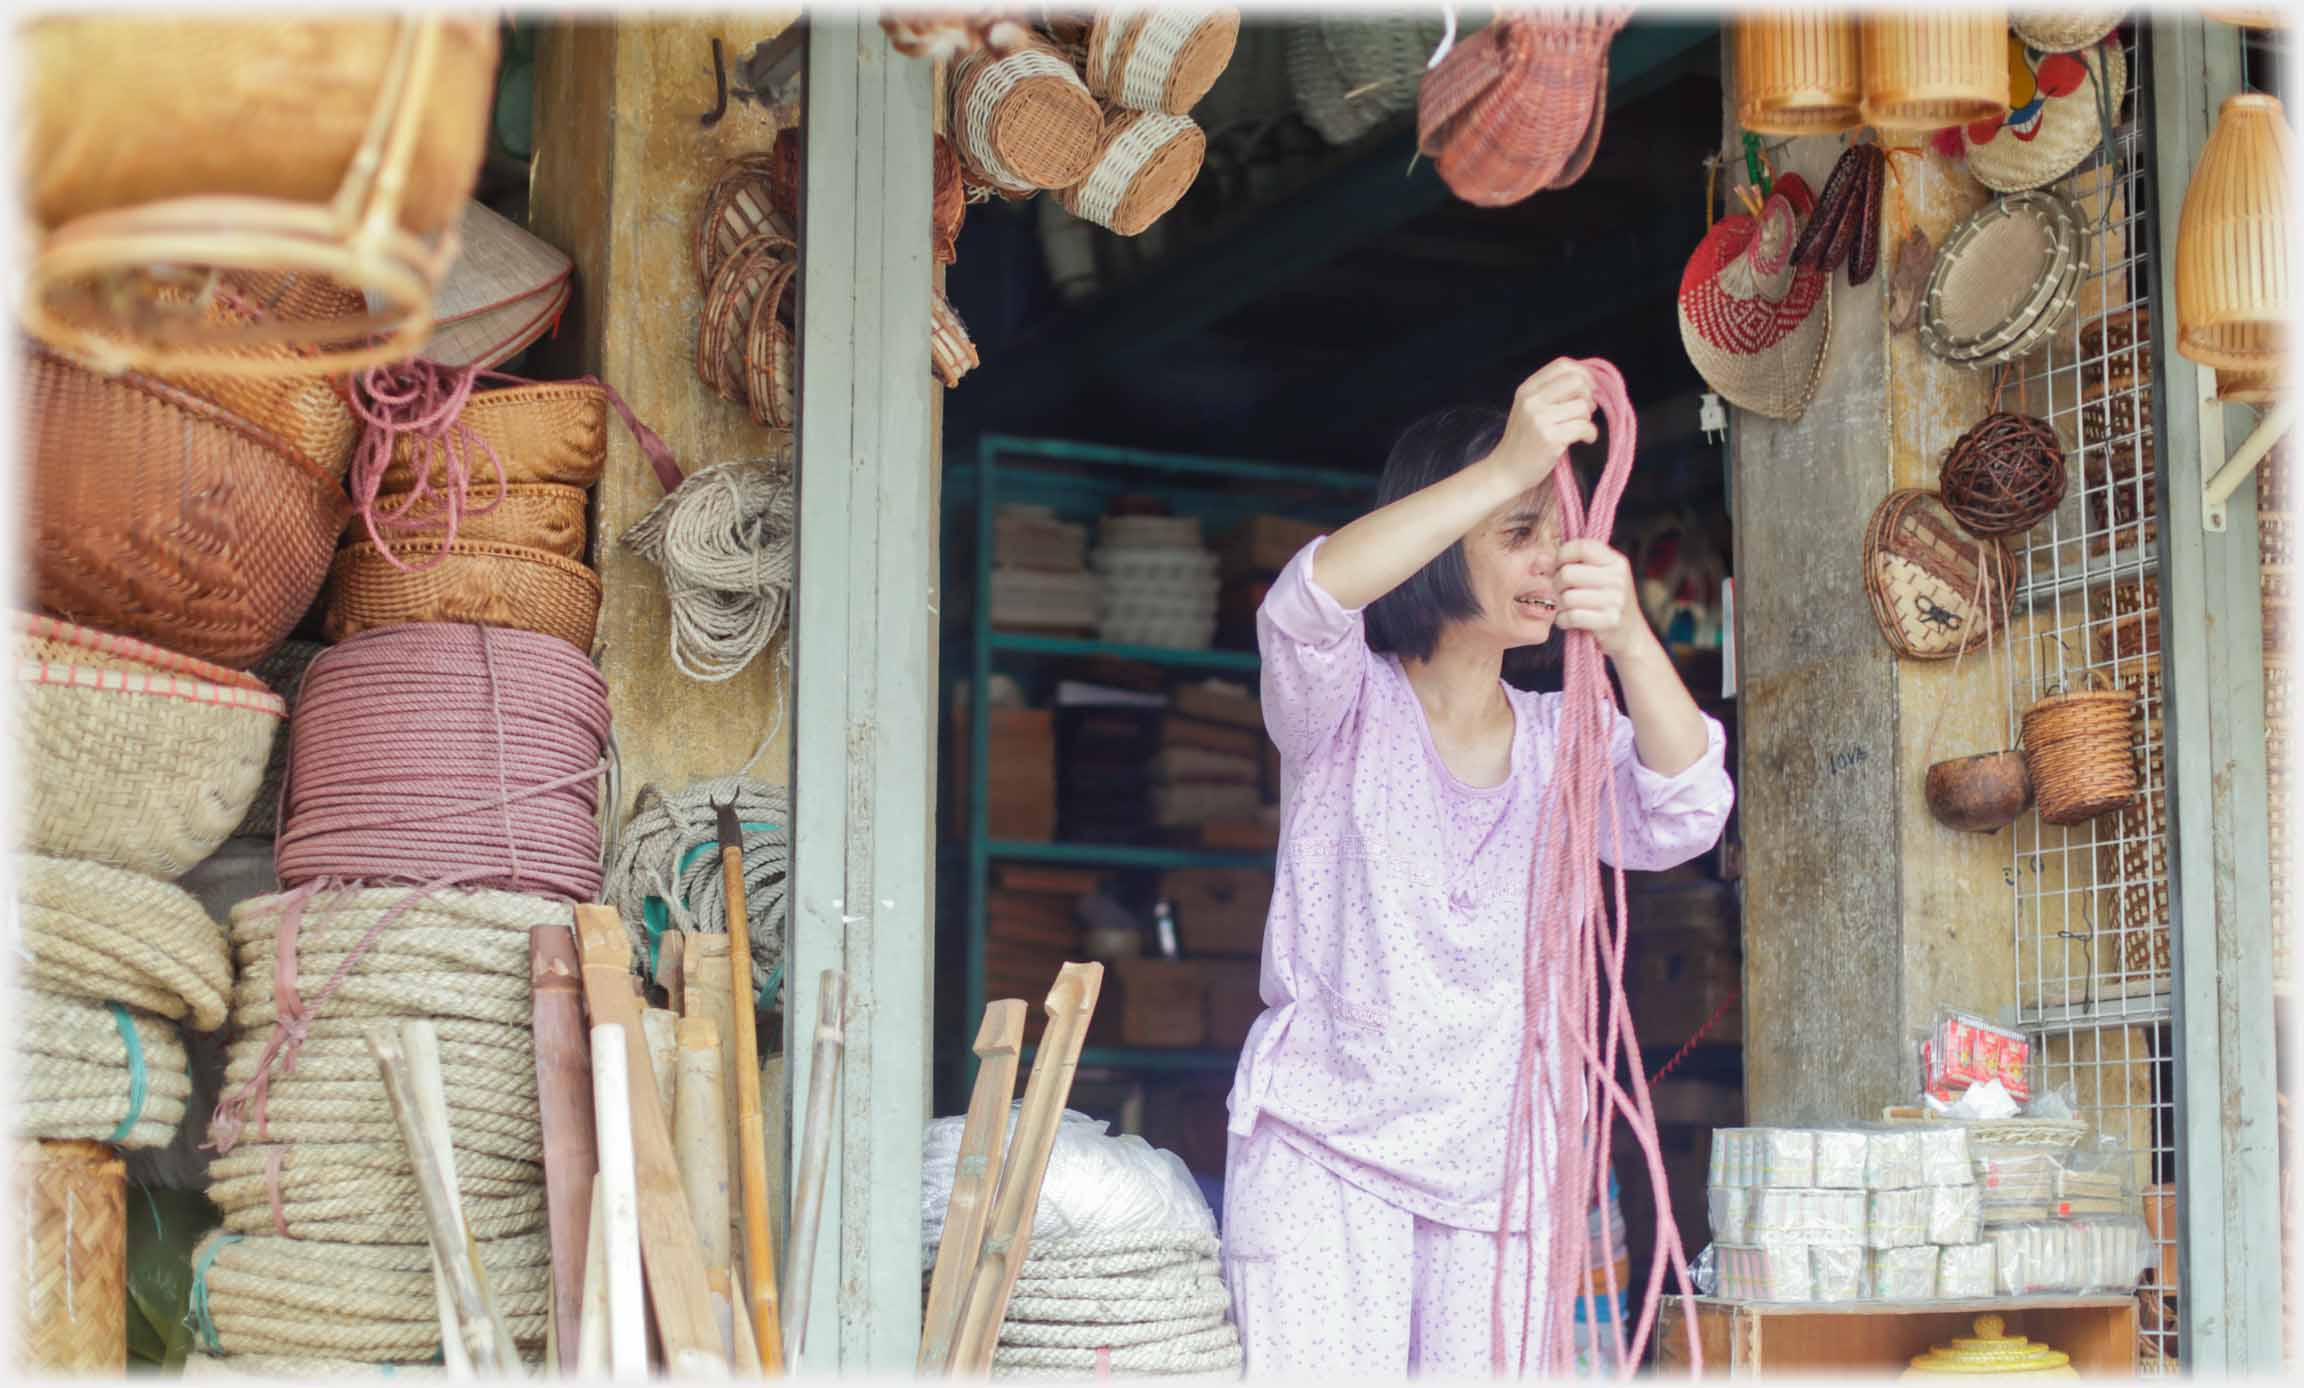 Woman handling rope surrounded by ropes and baskets.